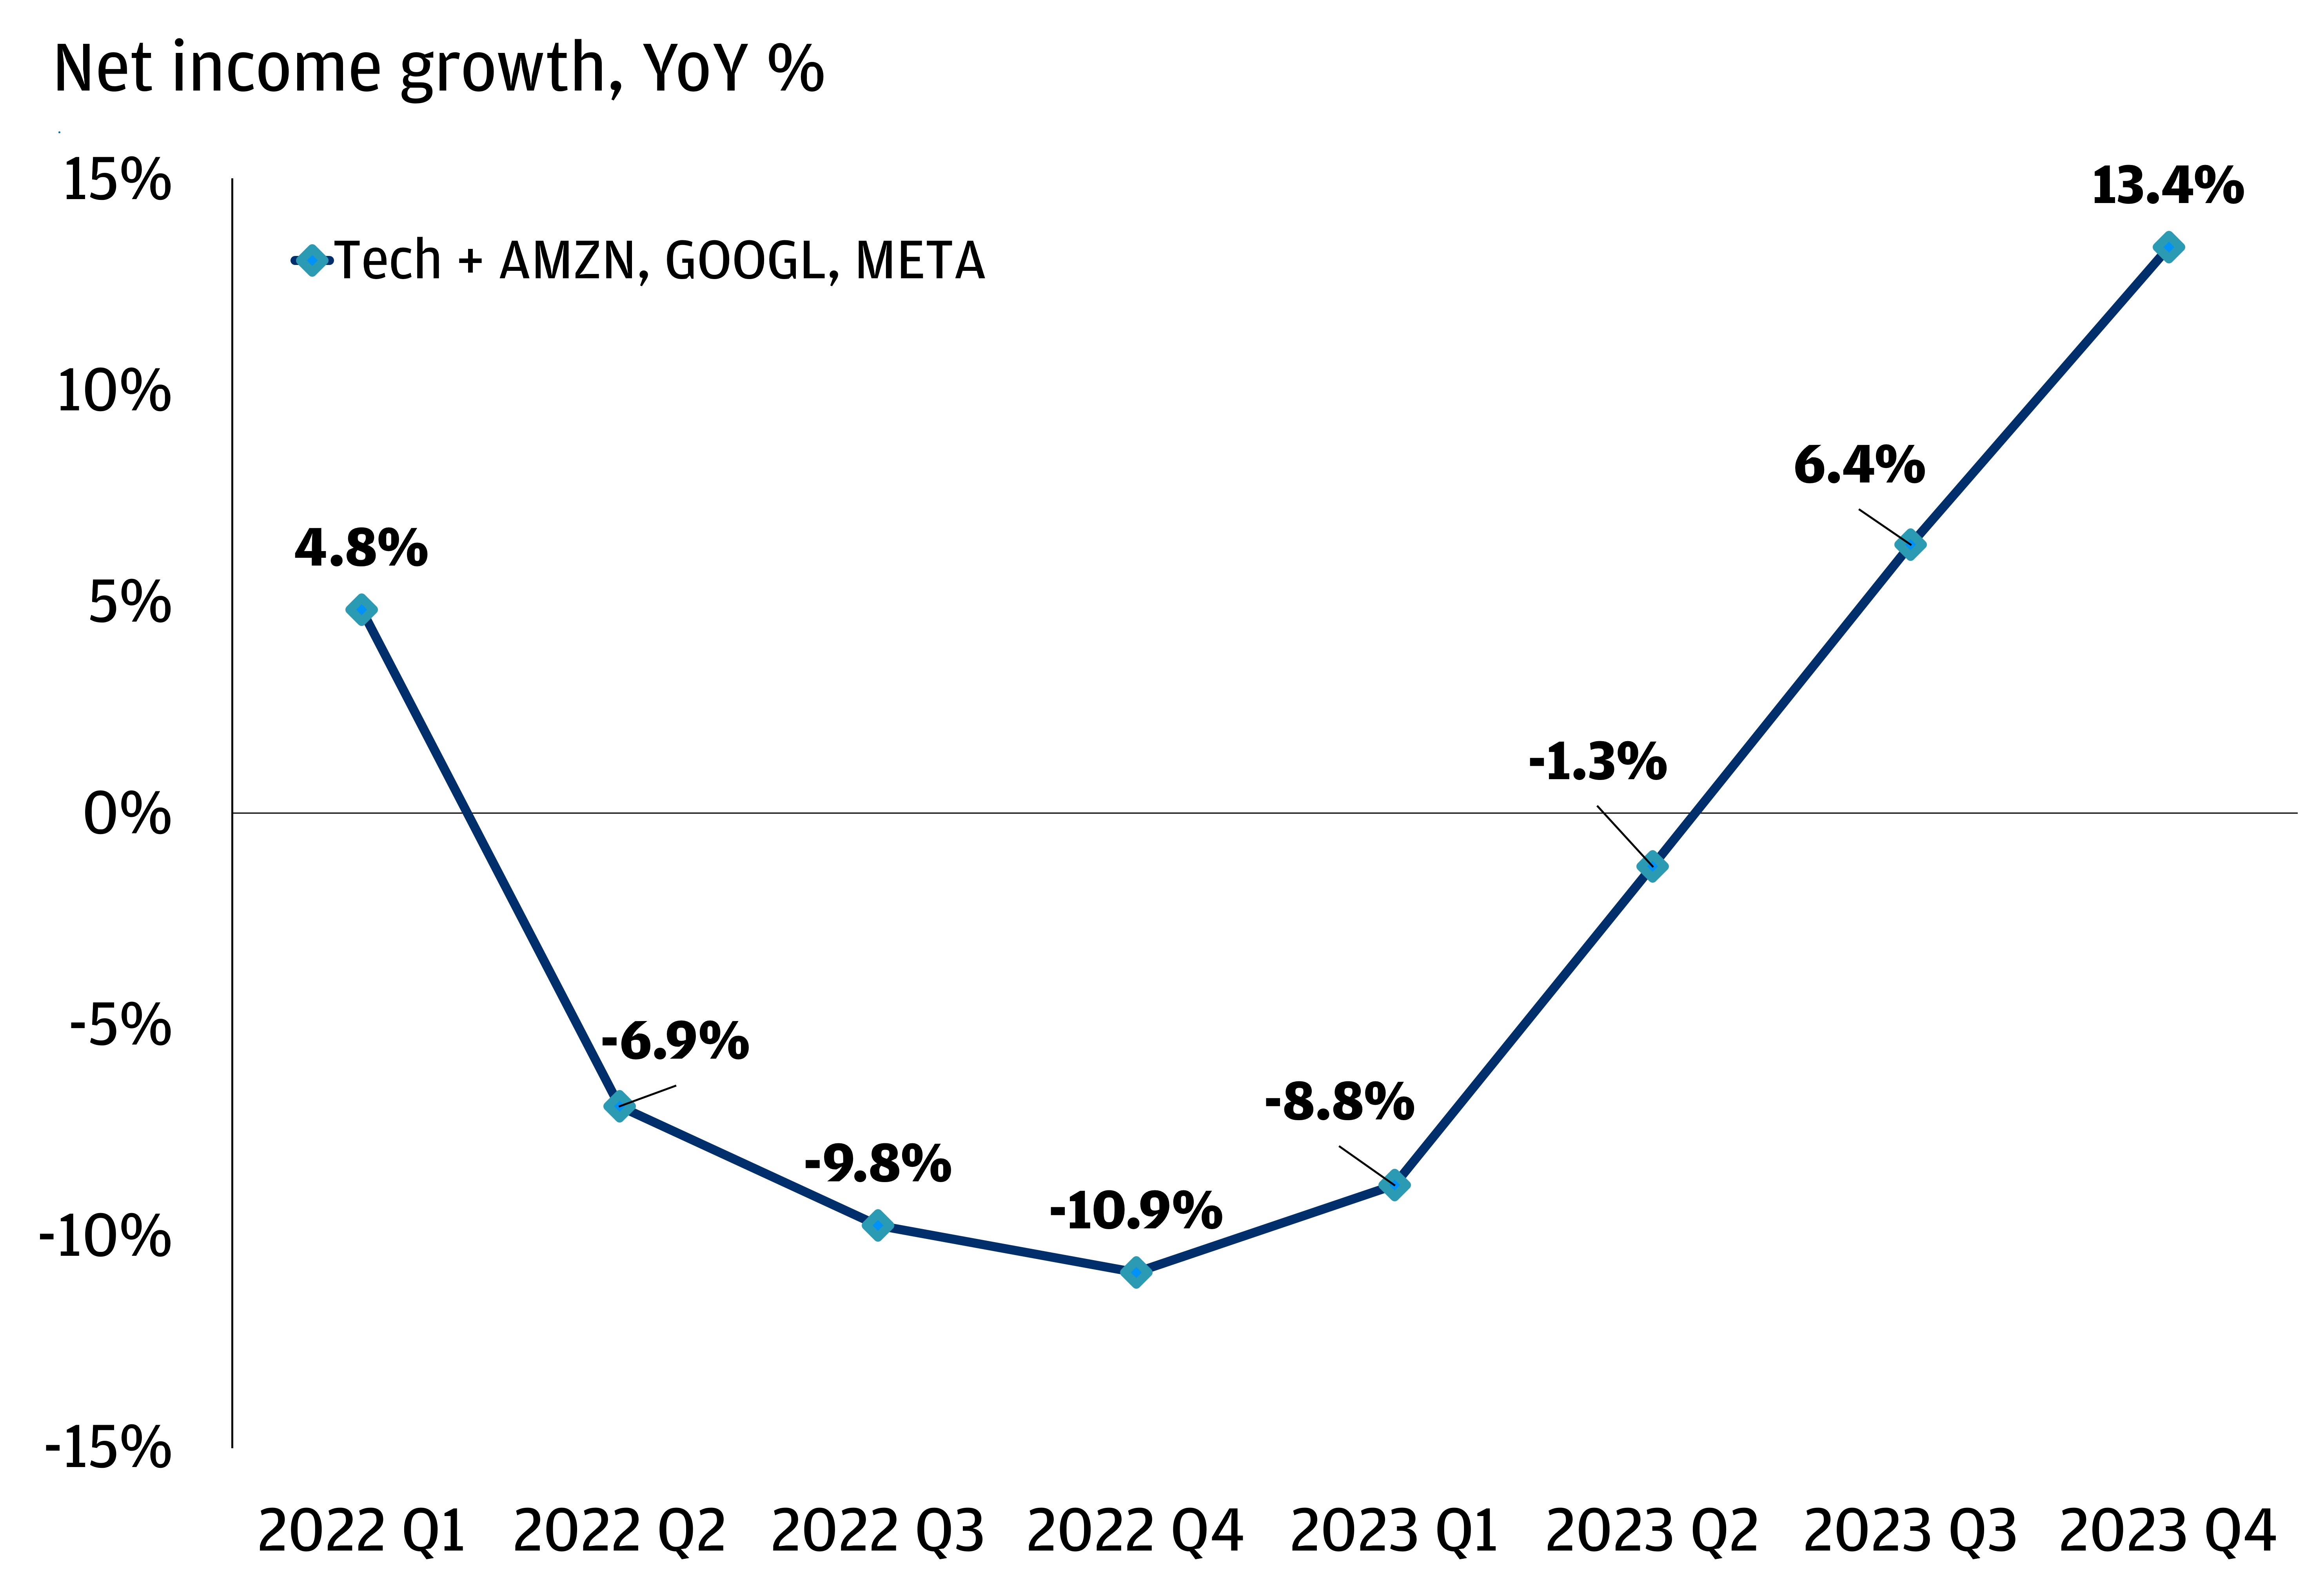 The chart describes the year-over-year % net income growth for tech + AMZN, GOOGL, META.